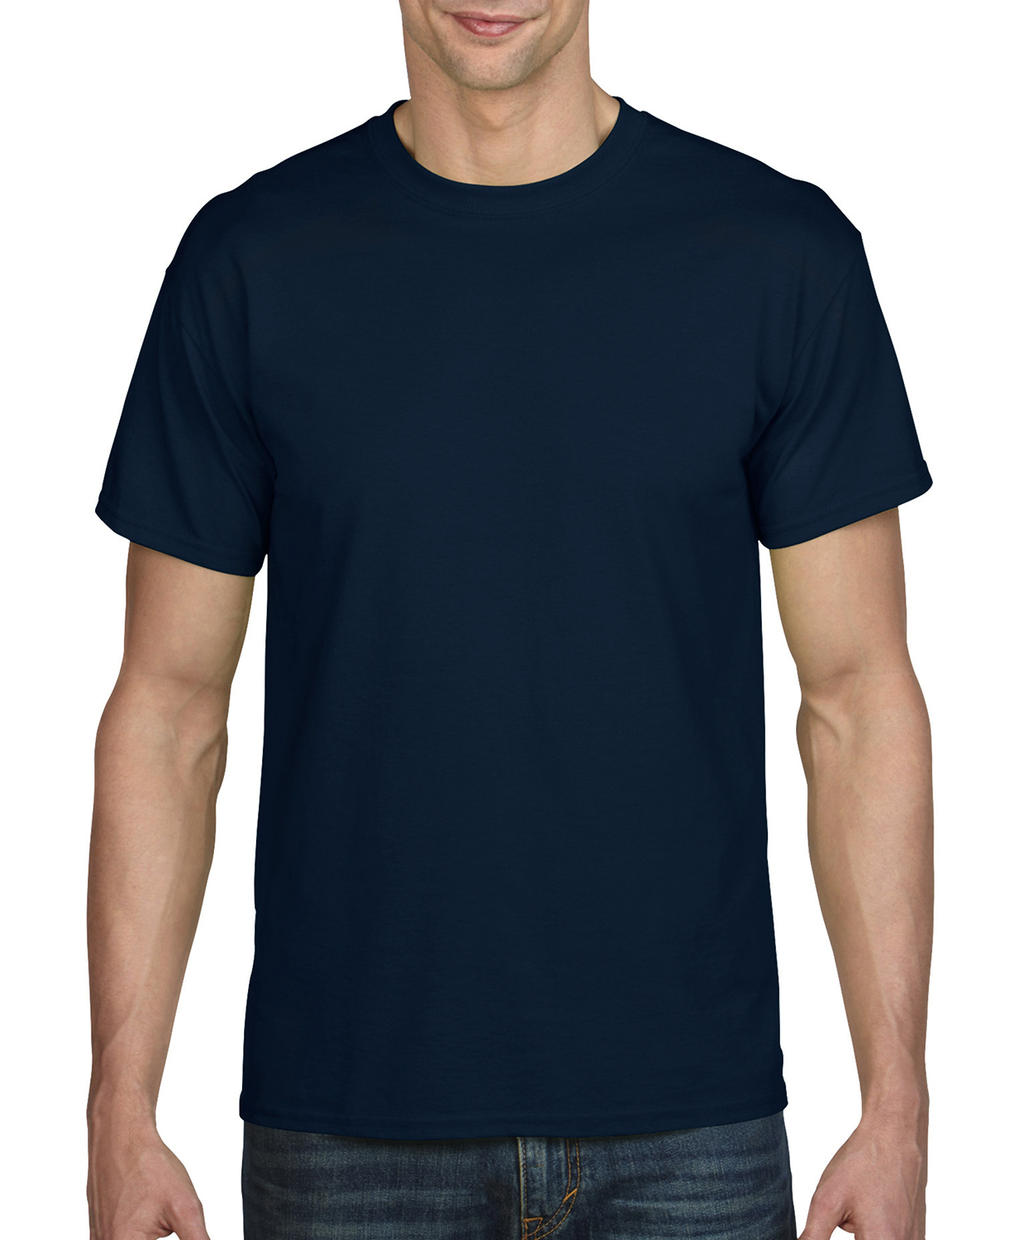  DryBlend? Adult T-Shirt in Farbe Navy